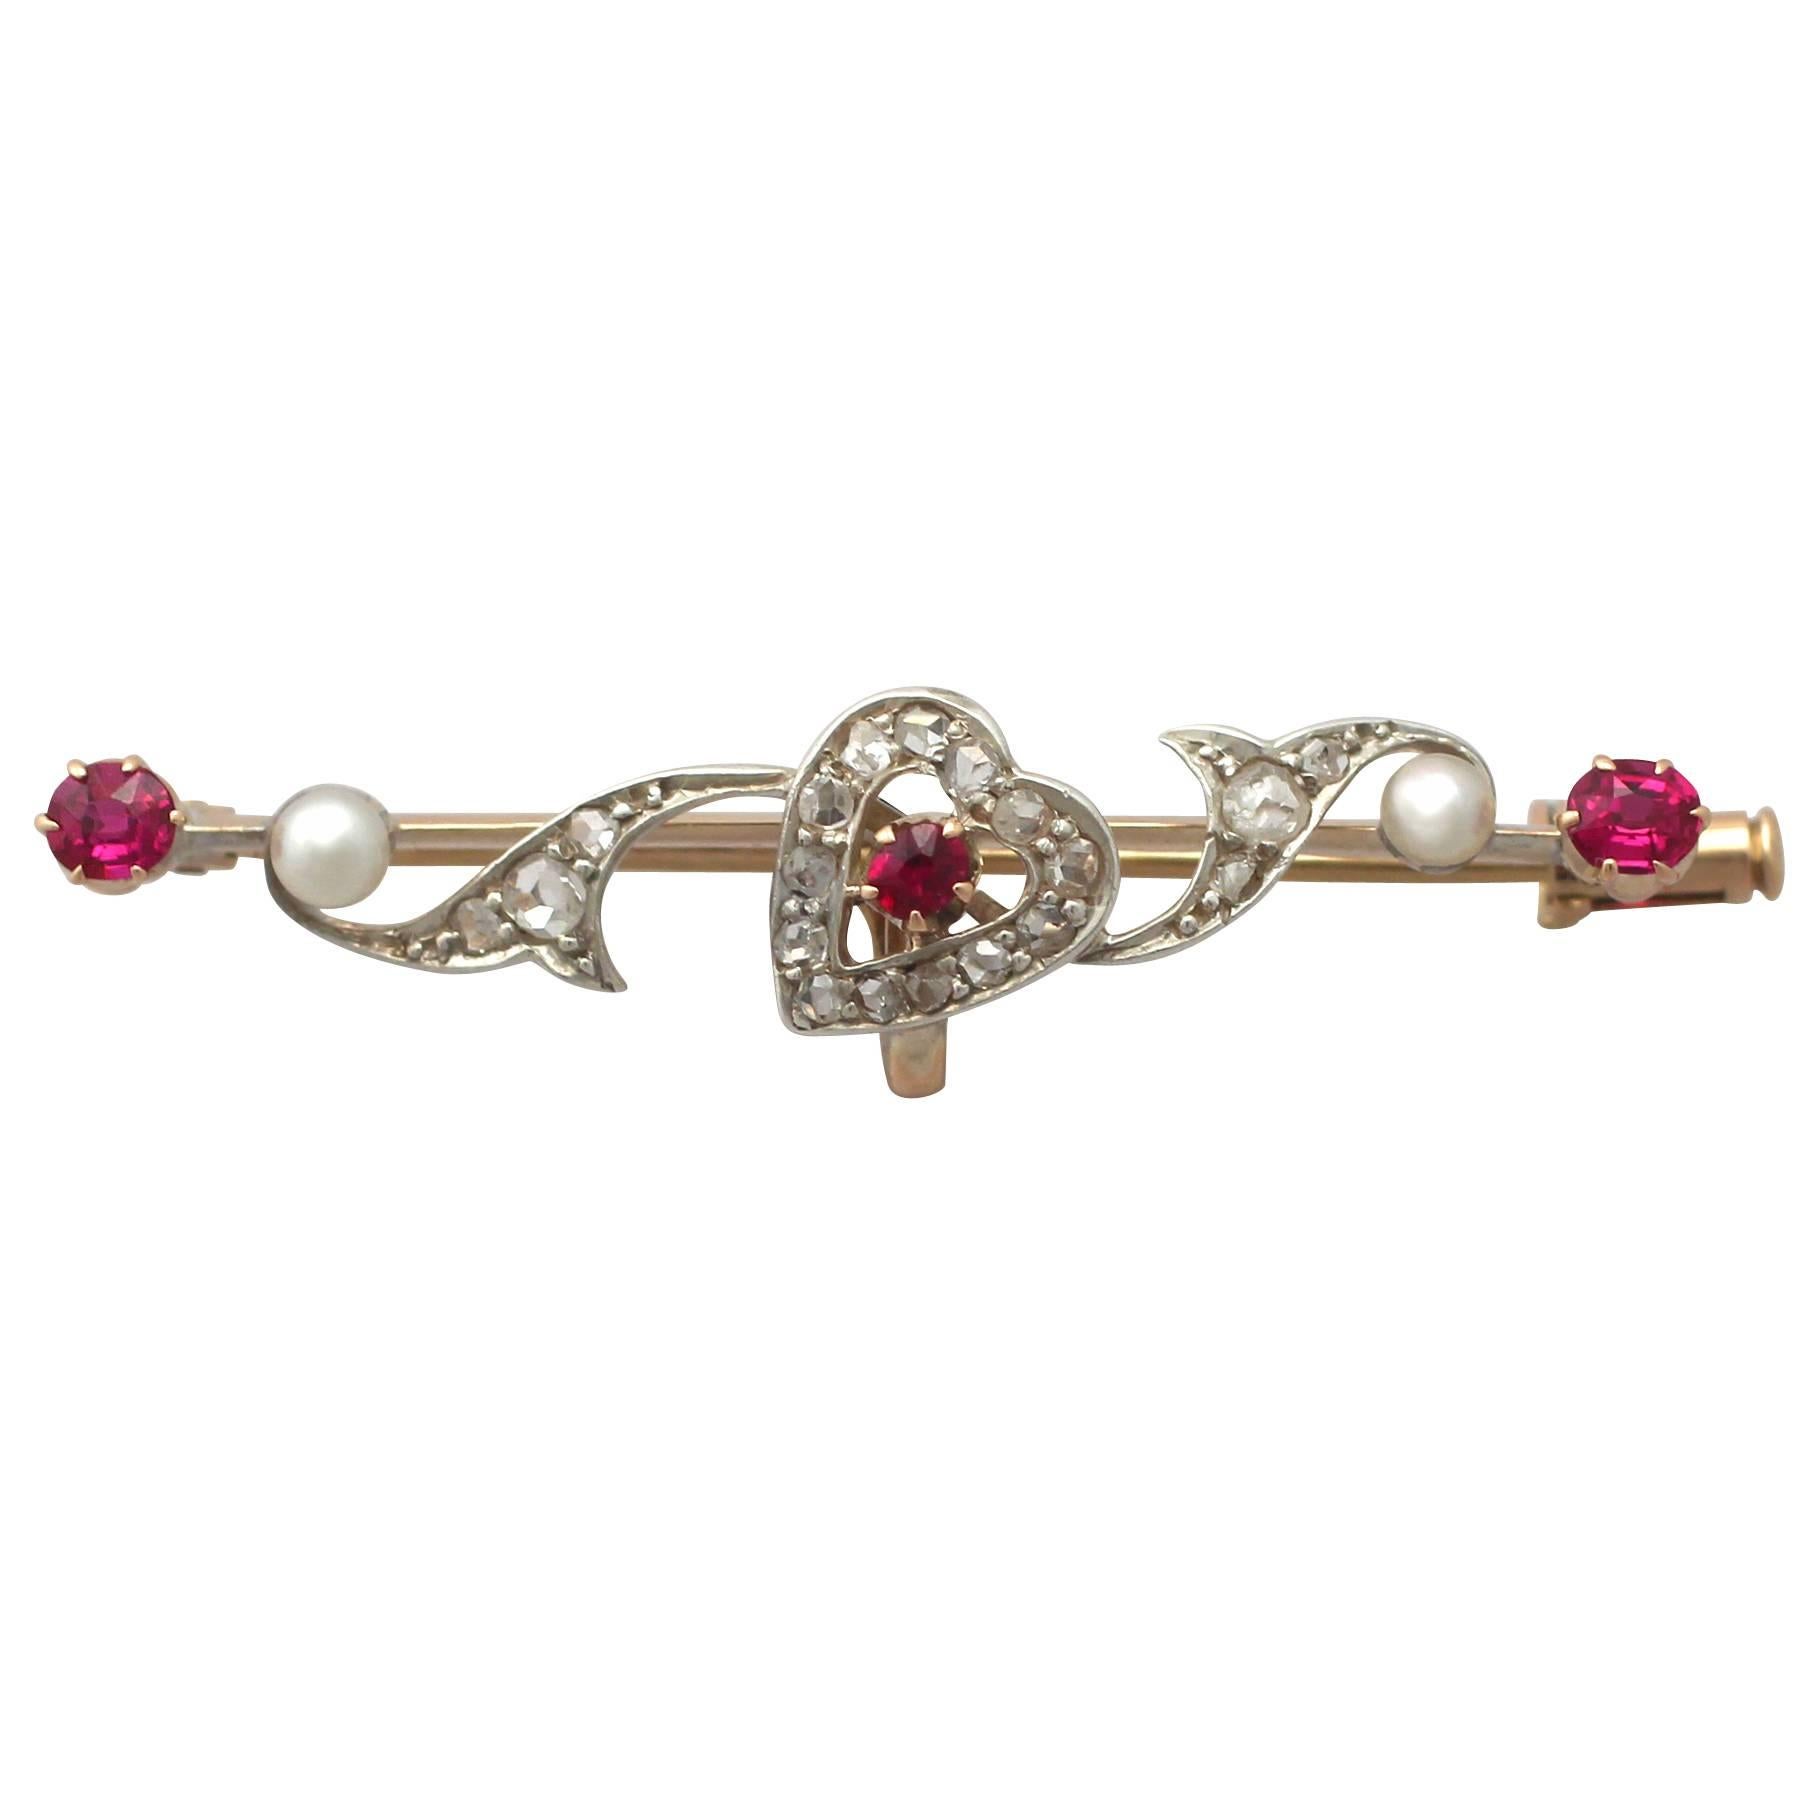 0.52Ct Ruby & 0.29Ct Diamond, Pearl & 14k Yellow Gold Brooch - Antique Victorian